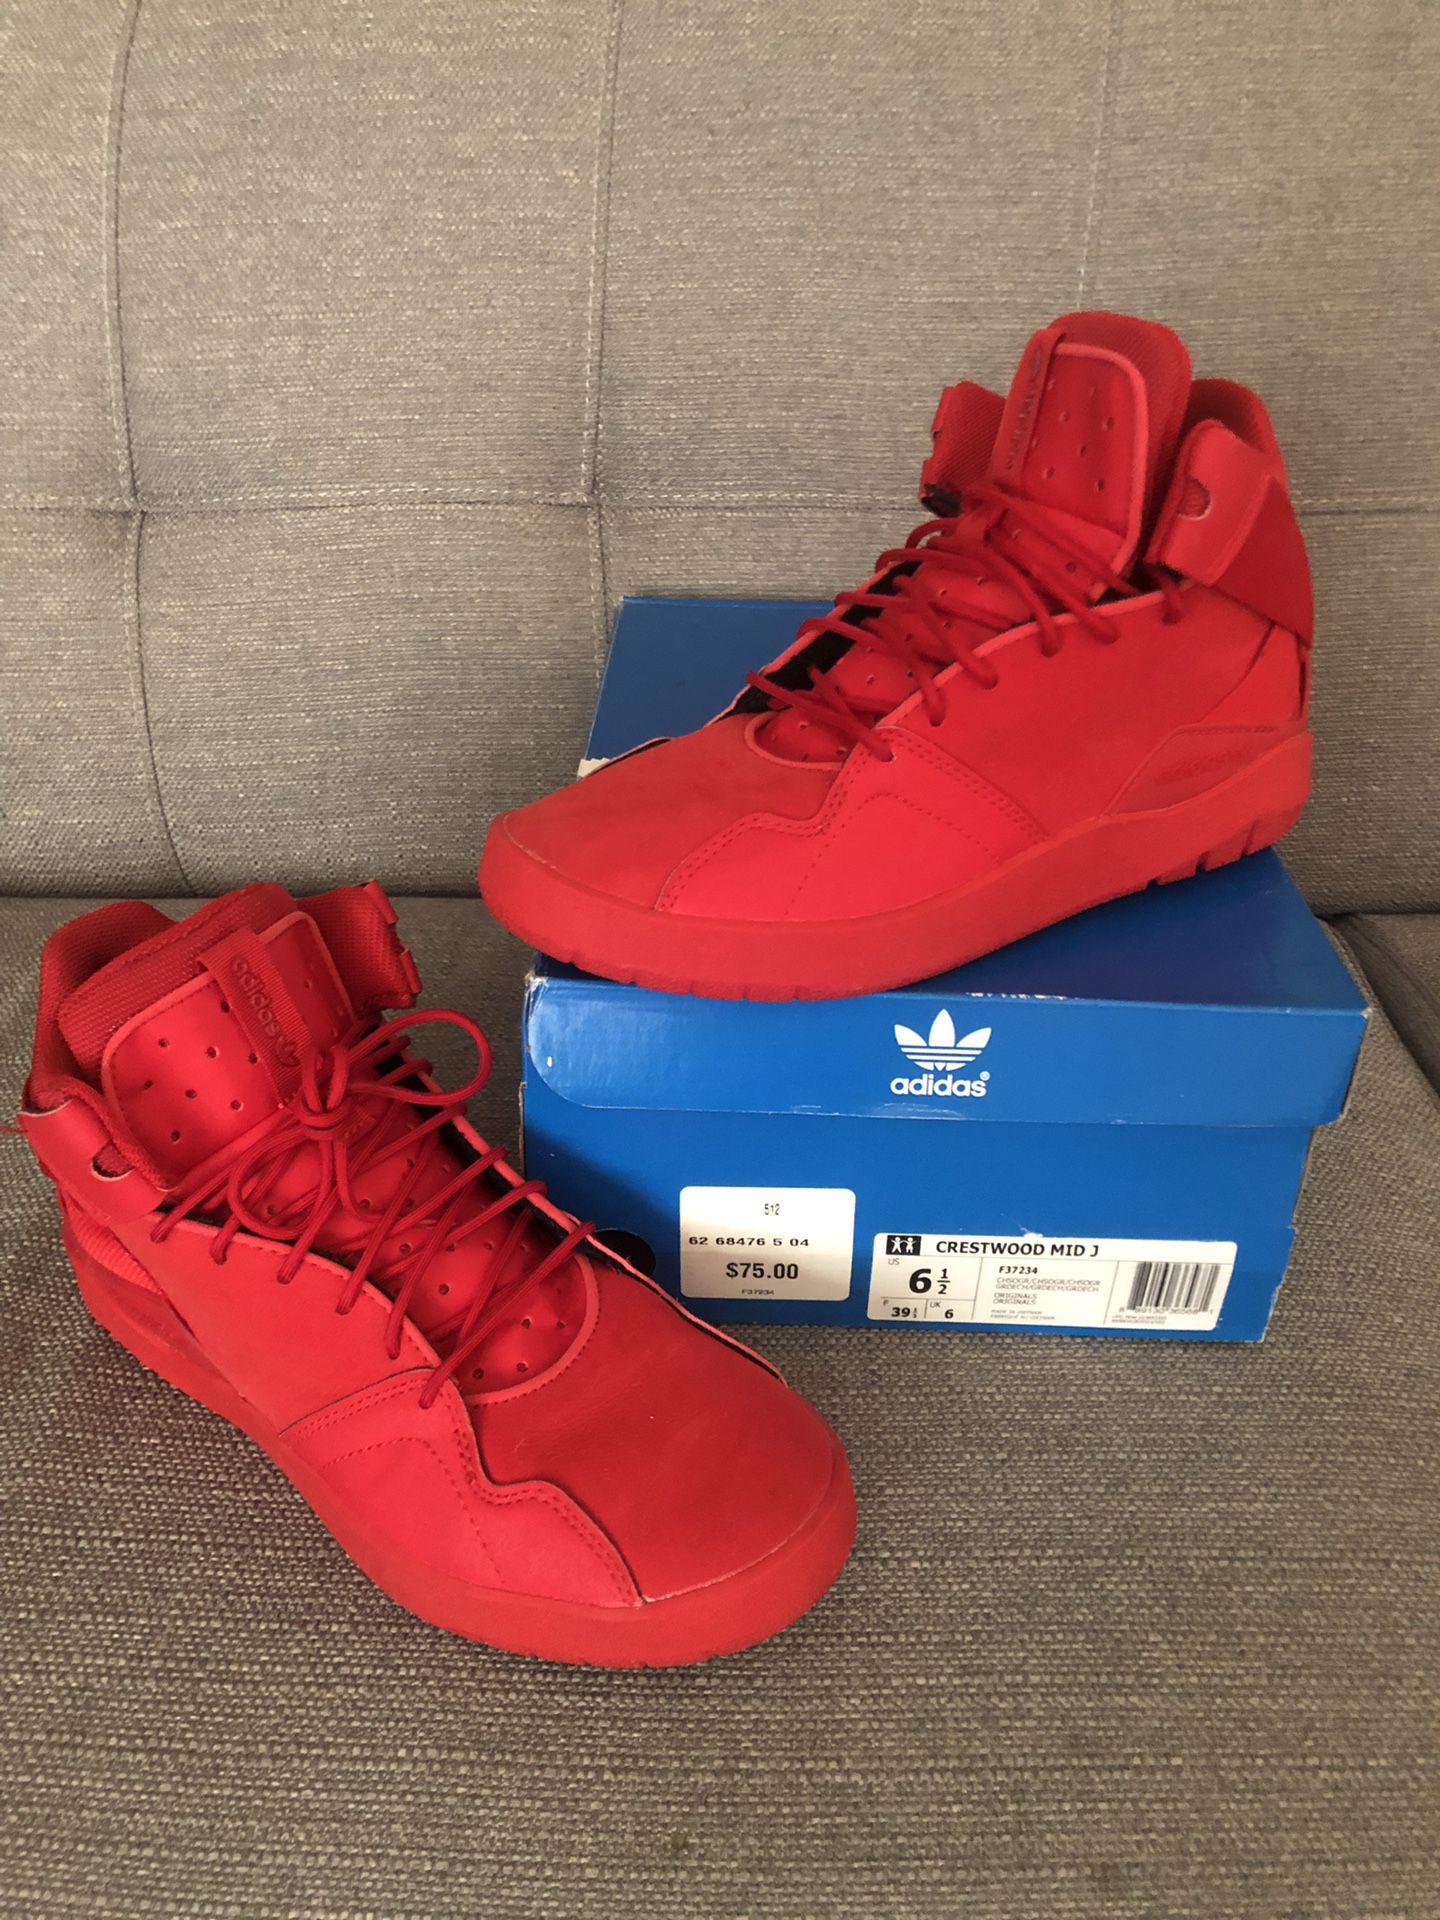 Adidas Red Shoes size 6.5 kids